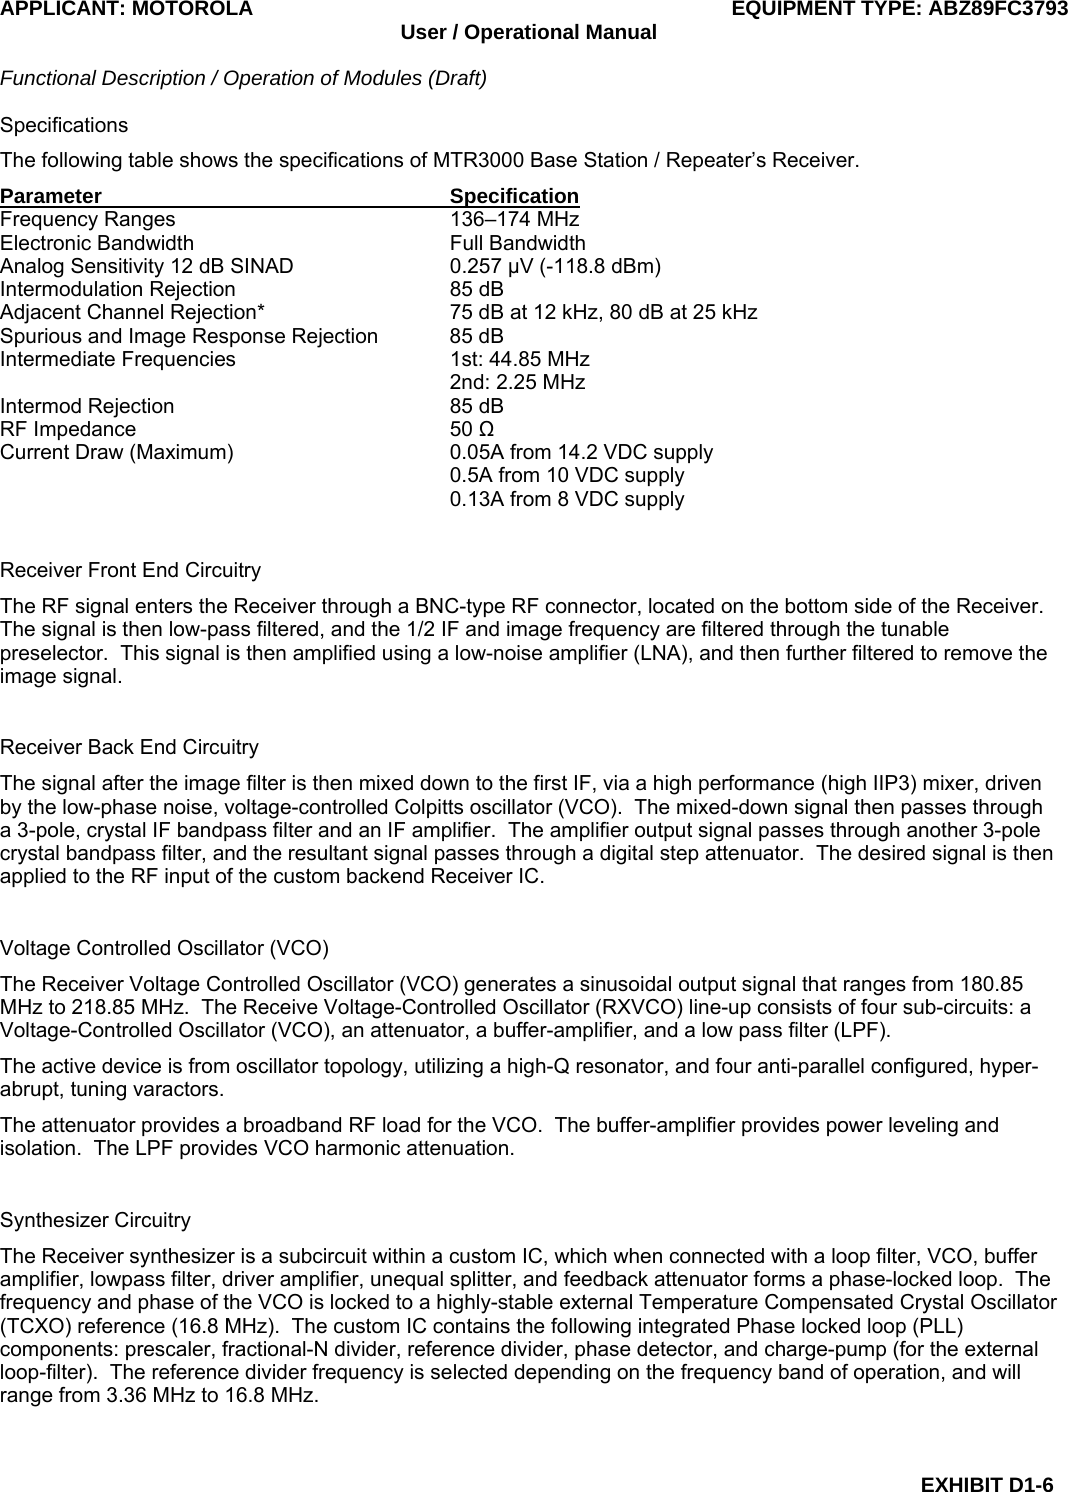 APPLICANT: MOTOROLA  EQUIPMENT TYPE: ABZ89FC3793 User / Operational Manual  Functional Description / Operation of Modules (Draft)  EXHIBIT D1-6 Specifications The following table shows the specifications of MTR3000 Base Station / Repeater’s Receiver. Parameter Specification Frequency Ranges  136–174 MHz Electronic Bandwidth  Full Bandwidth Analog Sensitivity 12 dB SINAD  0.257 μV (-118.8 dBm) Intermodulation Rejection  85 dB Adjacent Channel Rejection*  75 dB at 12 kHz, 80 dB at 25 kHz Spurious and Image Response Rejection  85 dB Intermediate Frequencies  1st: 44.85 MHz   2nd: 2.25 MHz Intermod Rejection  85 dB RF Impedance  50 Ω Current Draw (Maximum)  0.05A from 14.2 VDC supply   0.5A from 10 VDC supply   0.13A from 8 VDC supply  Receiver Front End Circuitry The RF signal enters the Receiver through a BNC-type RF connector, located on the bottom side of the Receiver.  The signal is then low-pass filtered, and the 1/2 IF and image frequency are filtered through the tunable preselector.  This signal is then amplified using a low-noise amplifier (LNA), and then further filtered to remove the image signal.  Receiver Back End Circuitry The signal after the image filter is then mixed down to the first IF, via a high performance (high IIP3) mixer, driven by the low-phase noise, voltage-controlled Colpitts oscillator (VCO).  The mixed-down signal then passes through a 3-pole, crystal IF bandpass filter and an IF amplifier.  The amplifier output signal passes through another 3-pole crystal bandpass filter, and the resultant signal passes through a digital step attenuator.  The desired signal is then applied to the RF input of the custom backend Receiver IC.  Voltage Controlled Oscillator (VCO) The Receiver Voltage Controlled Oscillator (VCO) generates a sinusoidal output signal that ranges from 180.85 MHz to 218.85 MHz.  The Receive Voltage-Controlled Oscillator (RXVCO) line-up consists of four sub-circuits: a Voltage-Controlled Oscillator (VCO), an attenuator, a buffer-amplifier, and a low pass filter (LPF). The active device is from oscillator topology, utilizing a high-Q resonator, and four anti-parallel configured, hyper-abrupt, tuning varactors. The attenuator provides a broadband RF load for the VCO.  The buffer-amplifier provides power leveling and isolation.  The LPF provides VCO harmonic attenuation.  Synthesizer Circuitry The Receiver synthesizer is a subcircuit within a custom IC, which when connected with a loop filter, VCO, buffer amplifier, lowpass filter, driver amplifier, unequal splitter, and feedback attenuator forms a phase-locked loop.  The frequency and phase of the VCO is locked to a highly-stable external Temperature Compensated Crystal Oscillator (TCXO) reference (16.8 MHz).  The custom IC contains the following integrated Phase locked loop (PLL) components: prescaler, fractional-N divider, reference divider, phase detector, and charge-pump (for the external loop-filter).  The reference divider frequency is selected depending on the frequency band of operation, and will range from 3.36 MHz to 16.8 MHz.  